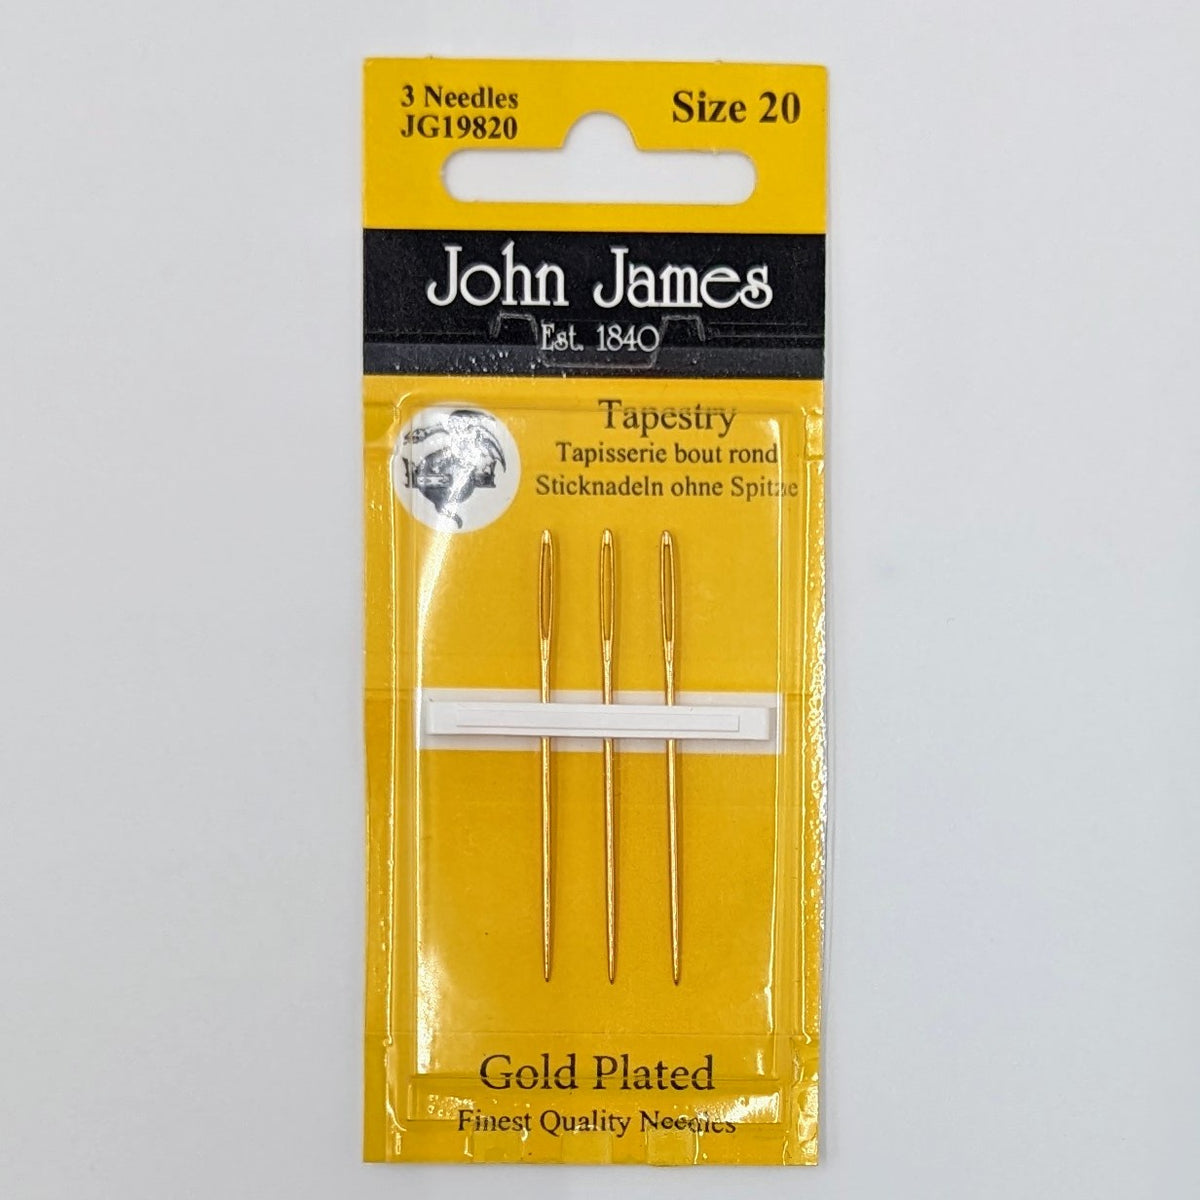 Size 20 Gold Plated Needles (pack of 3 needles)